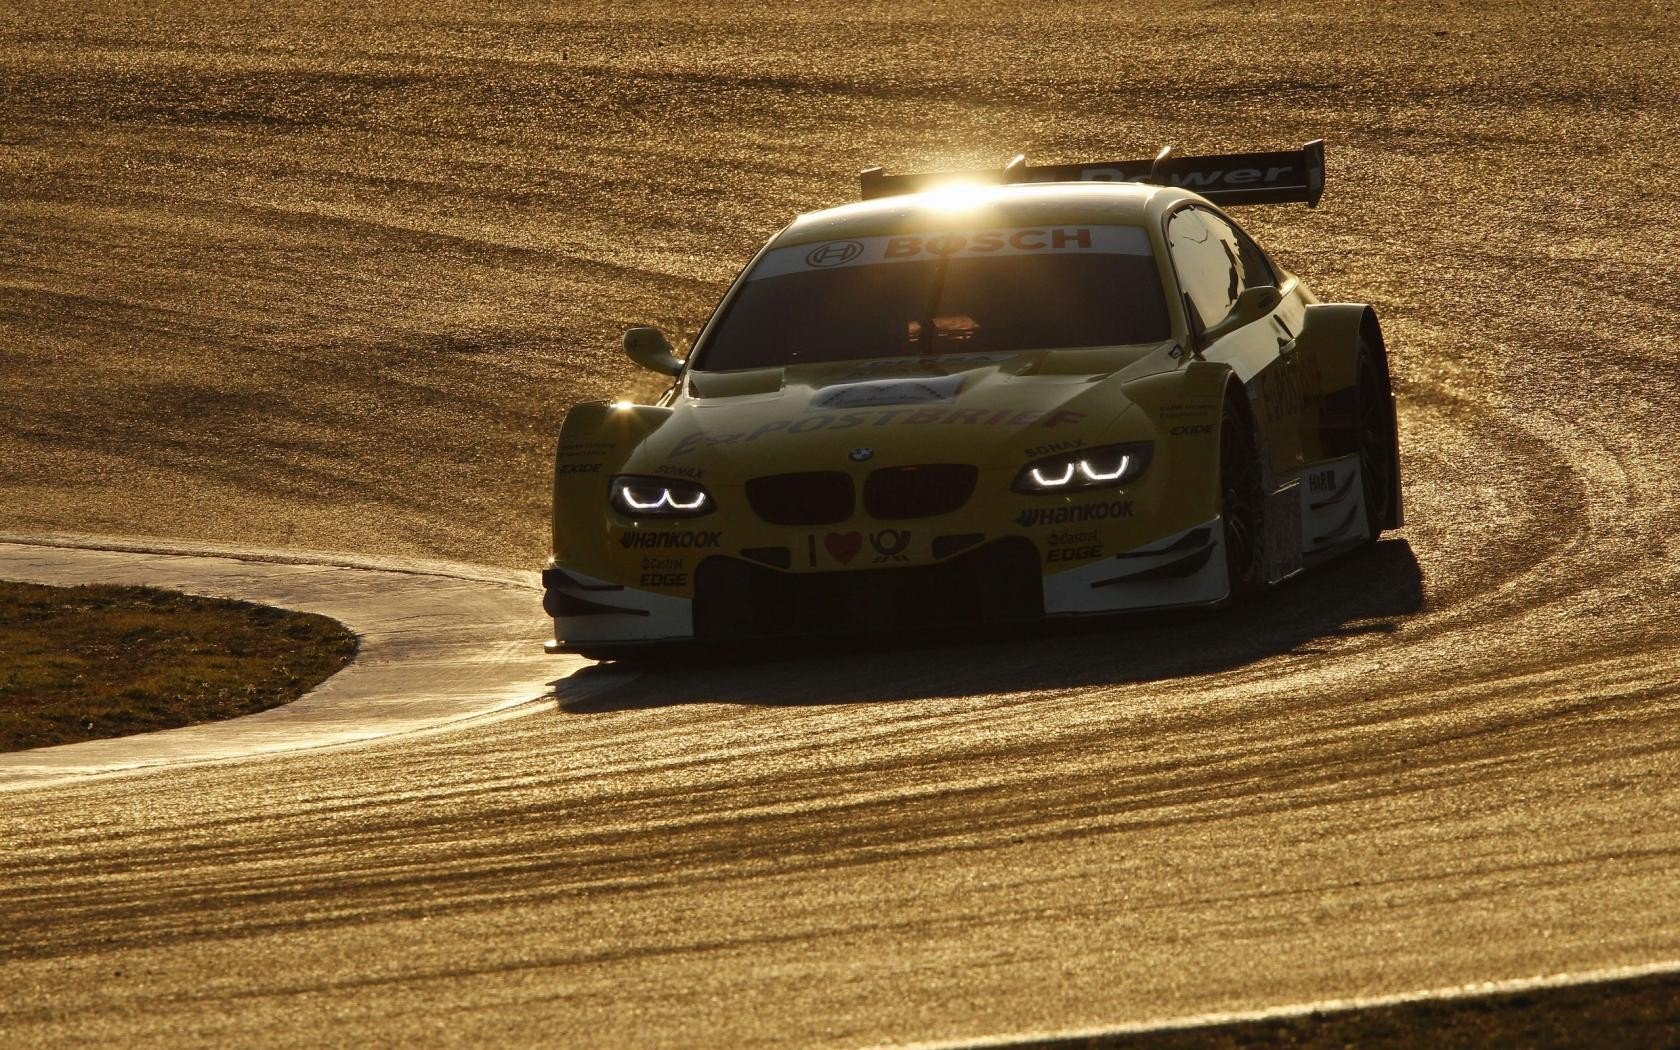 Bmw M3 Dtm Project Cars Bmw M3 E92 Wallpapers Hd Desktop And Mobile Backgrounds